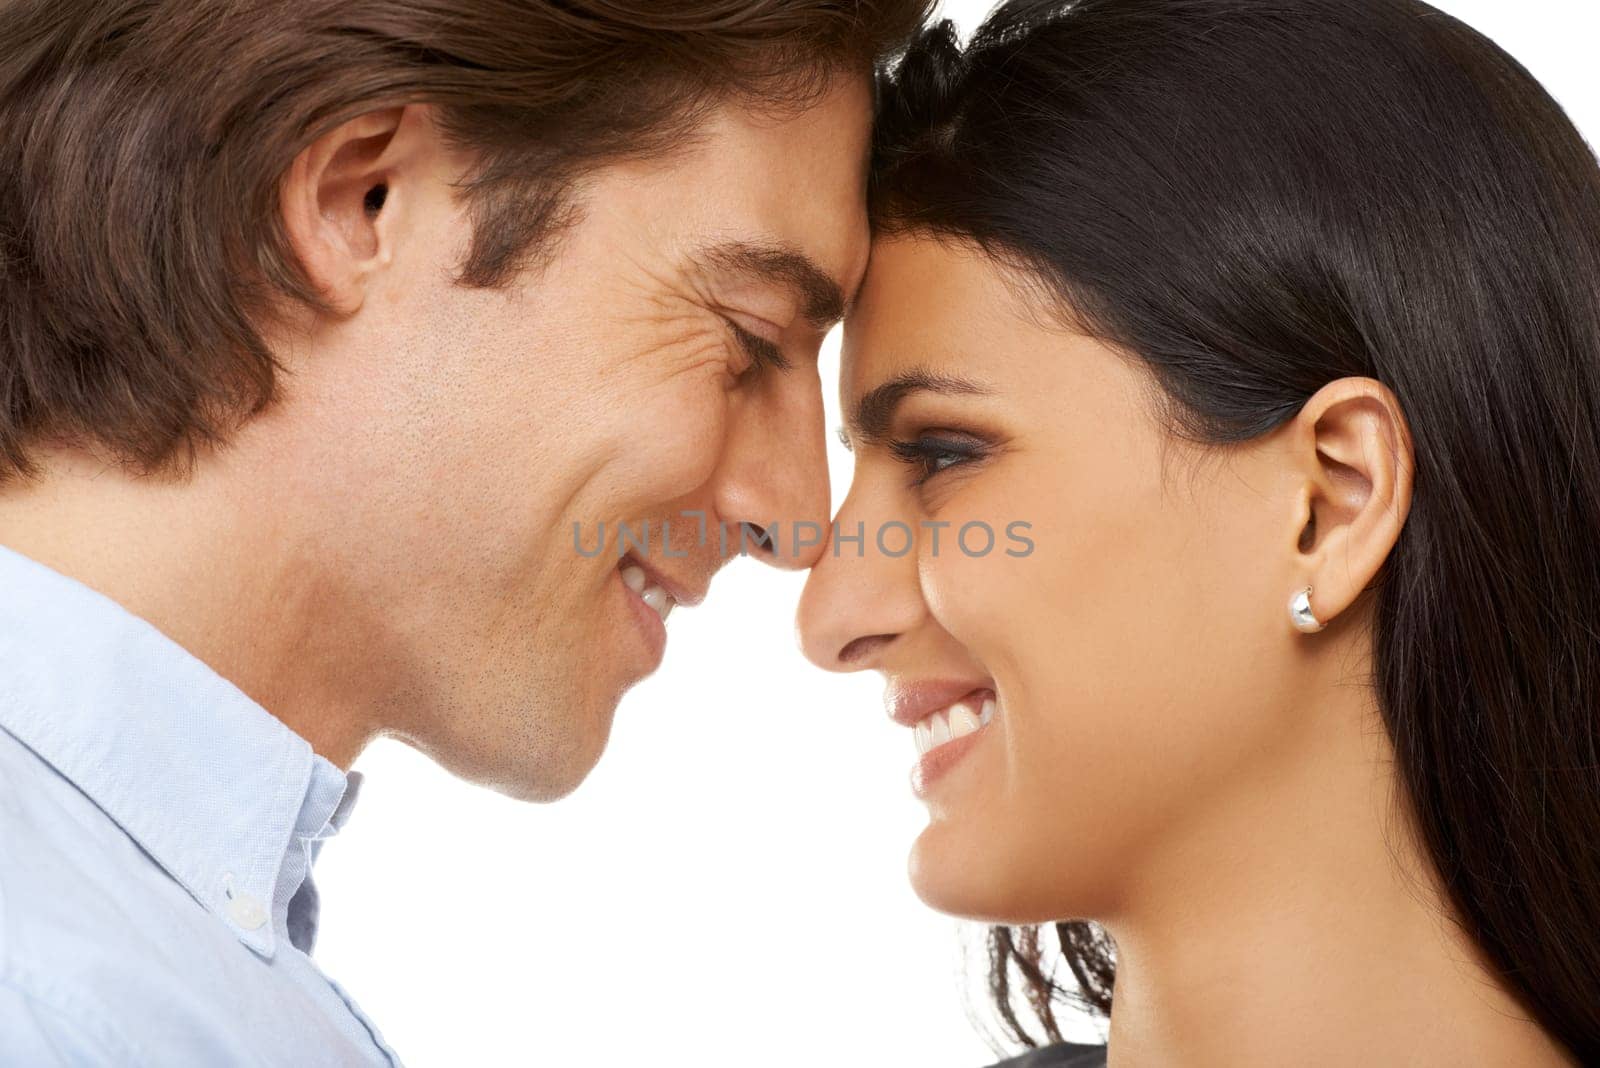 Couple, forehead and smile for love, valentines day or date in affection isolated against white studio background. Closeup of man and woman smiling touching heads embracing special month of romance.